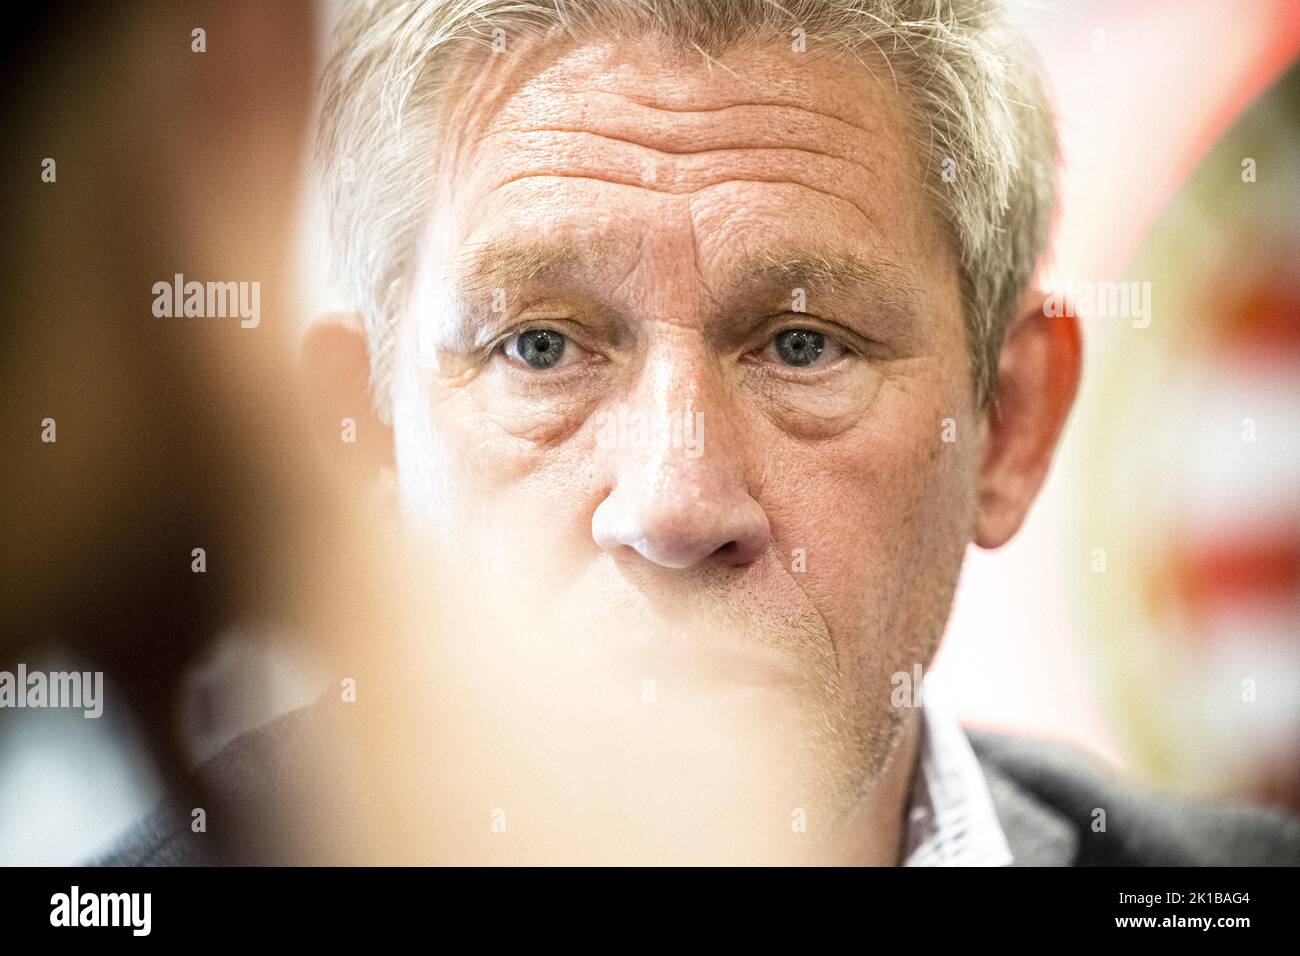 2022-09-17 11:12:35 EINDHOVEN - PSV general manager Marcel Brands during a press moment. A day earlier, it was announced that PSV and football affairs director John de Jong would split up immediately. ANP ROB ENGELAAR netherlands out - belgium out Credit: ANP/Alamy Live News Stock Photo